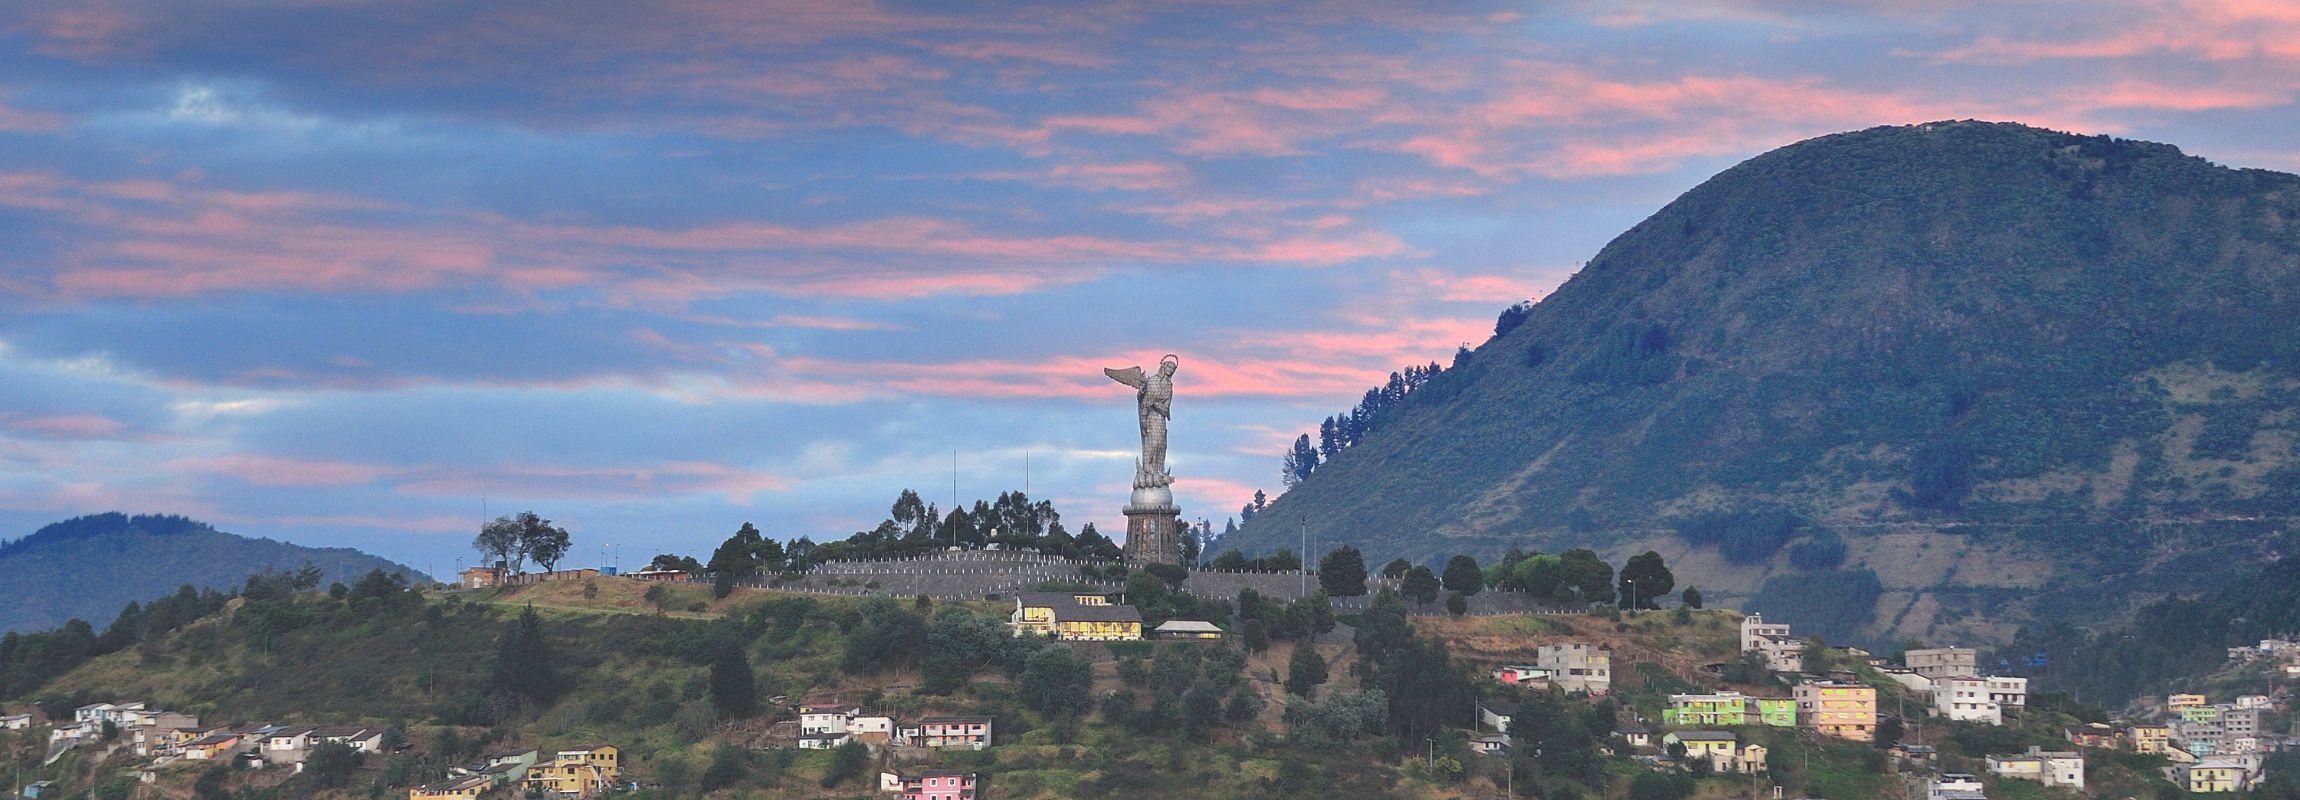 Quito & Cumbaya Guide: What to do on your own